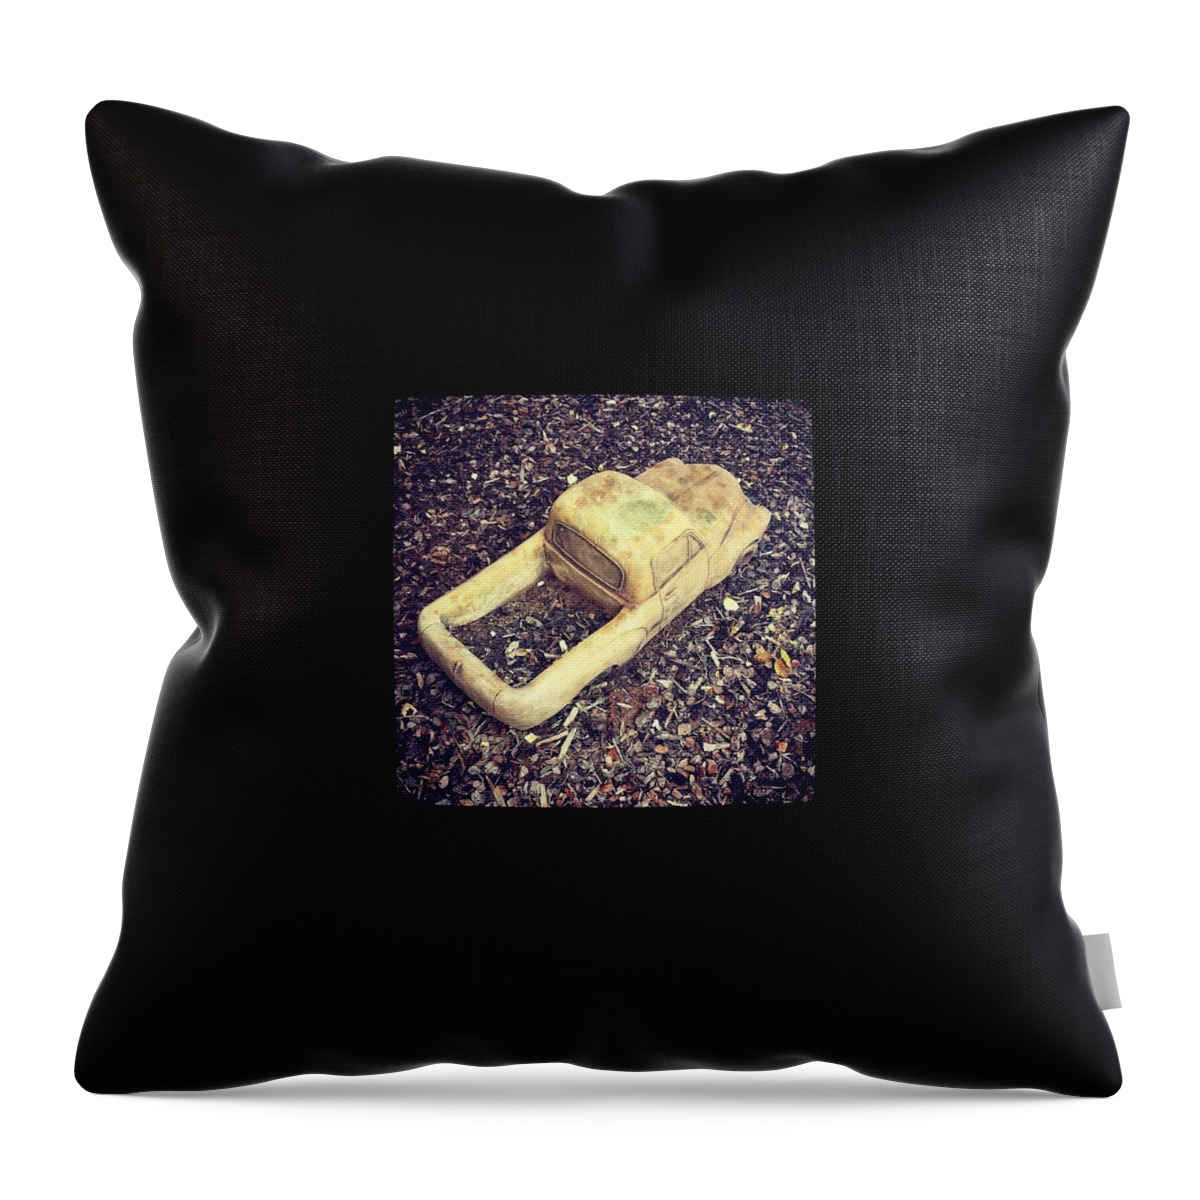 Car Throw Pillow featuring the photograph Instagram Photo by Aquene Emil